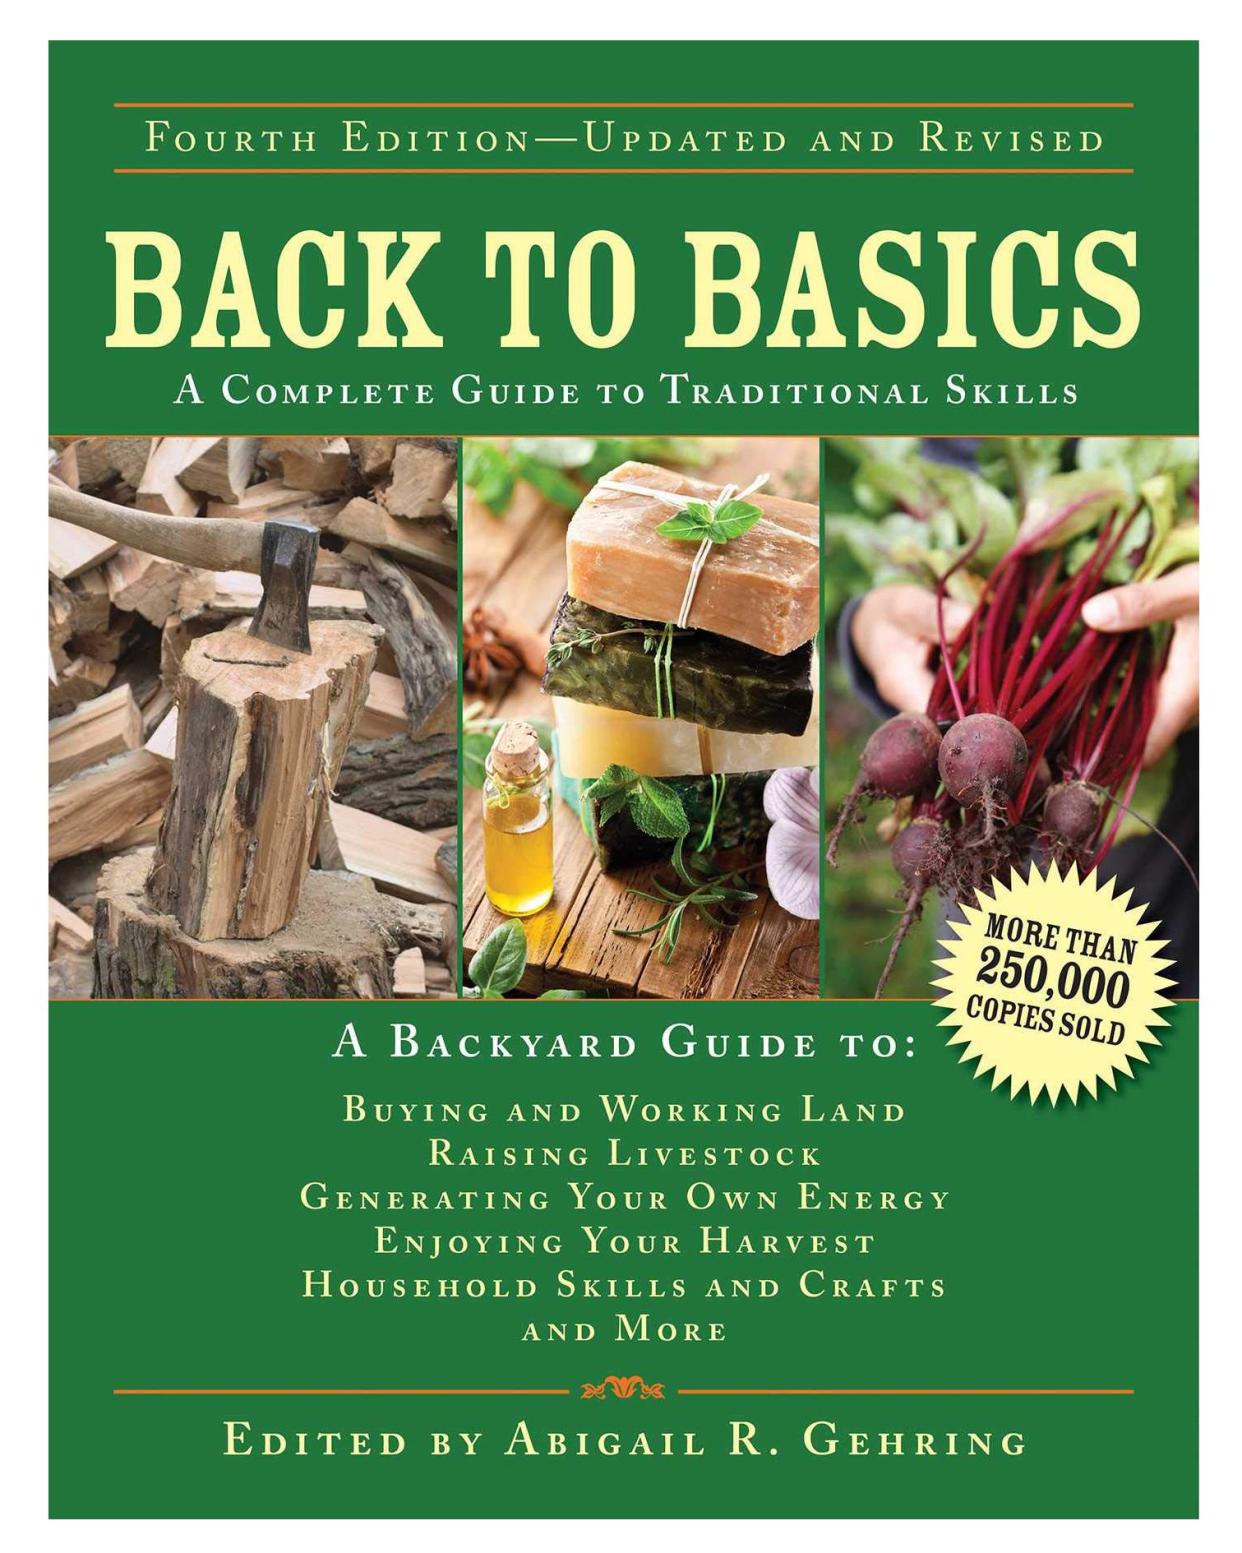 'Back to Basics: A Complete Guide to Traditional Skills'